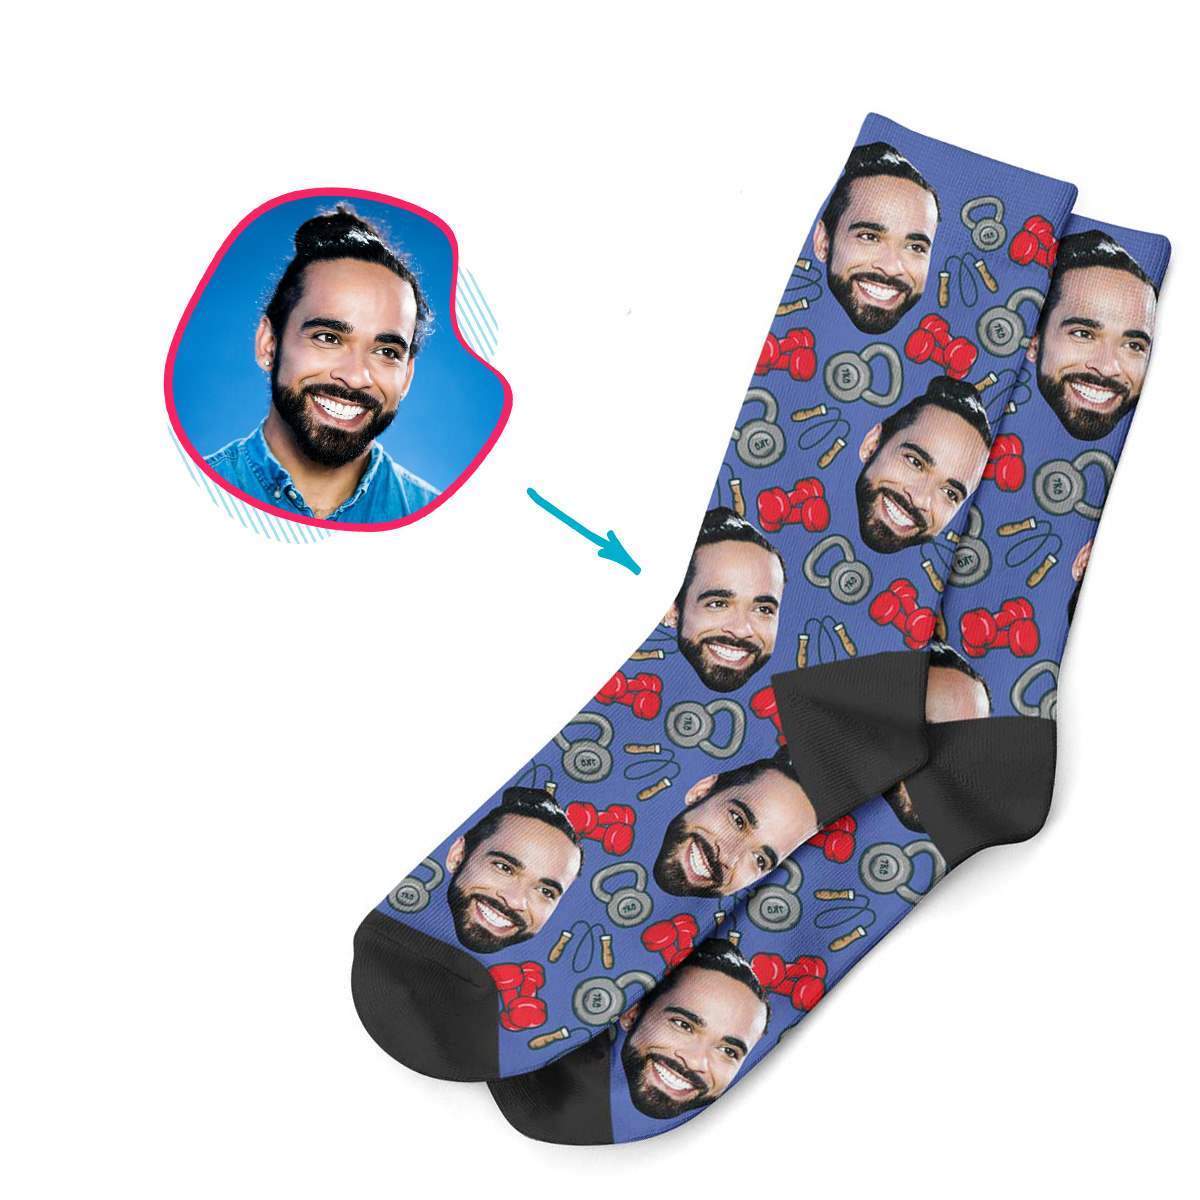 darkblue Gym & Fitness socks personalized with photo of face printed on them